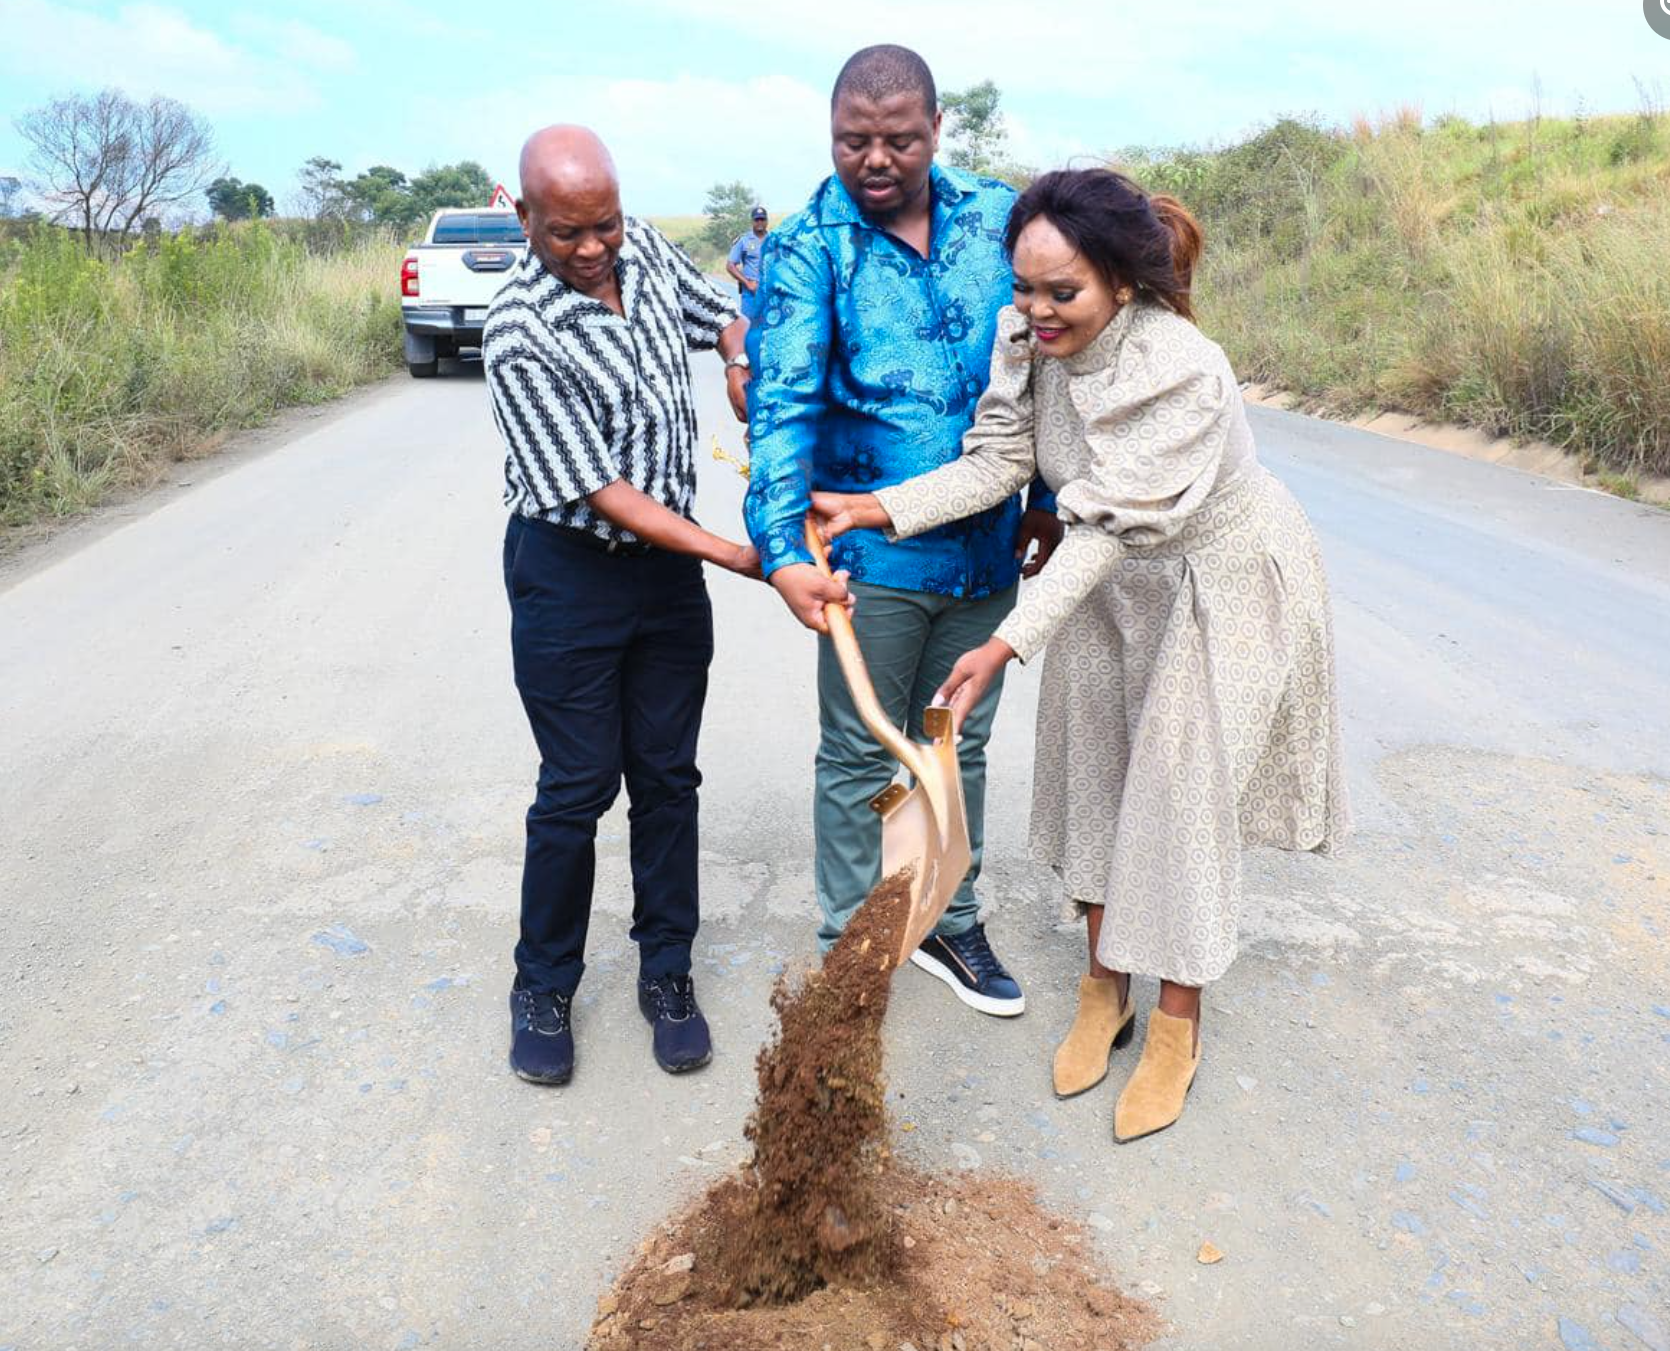 The upgrade of main road P16-2 from gravel to blackop will cover 27.3 kilometres at an estimated cost of R639 million